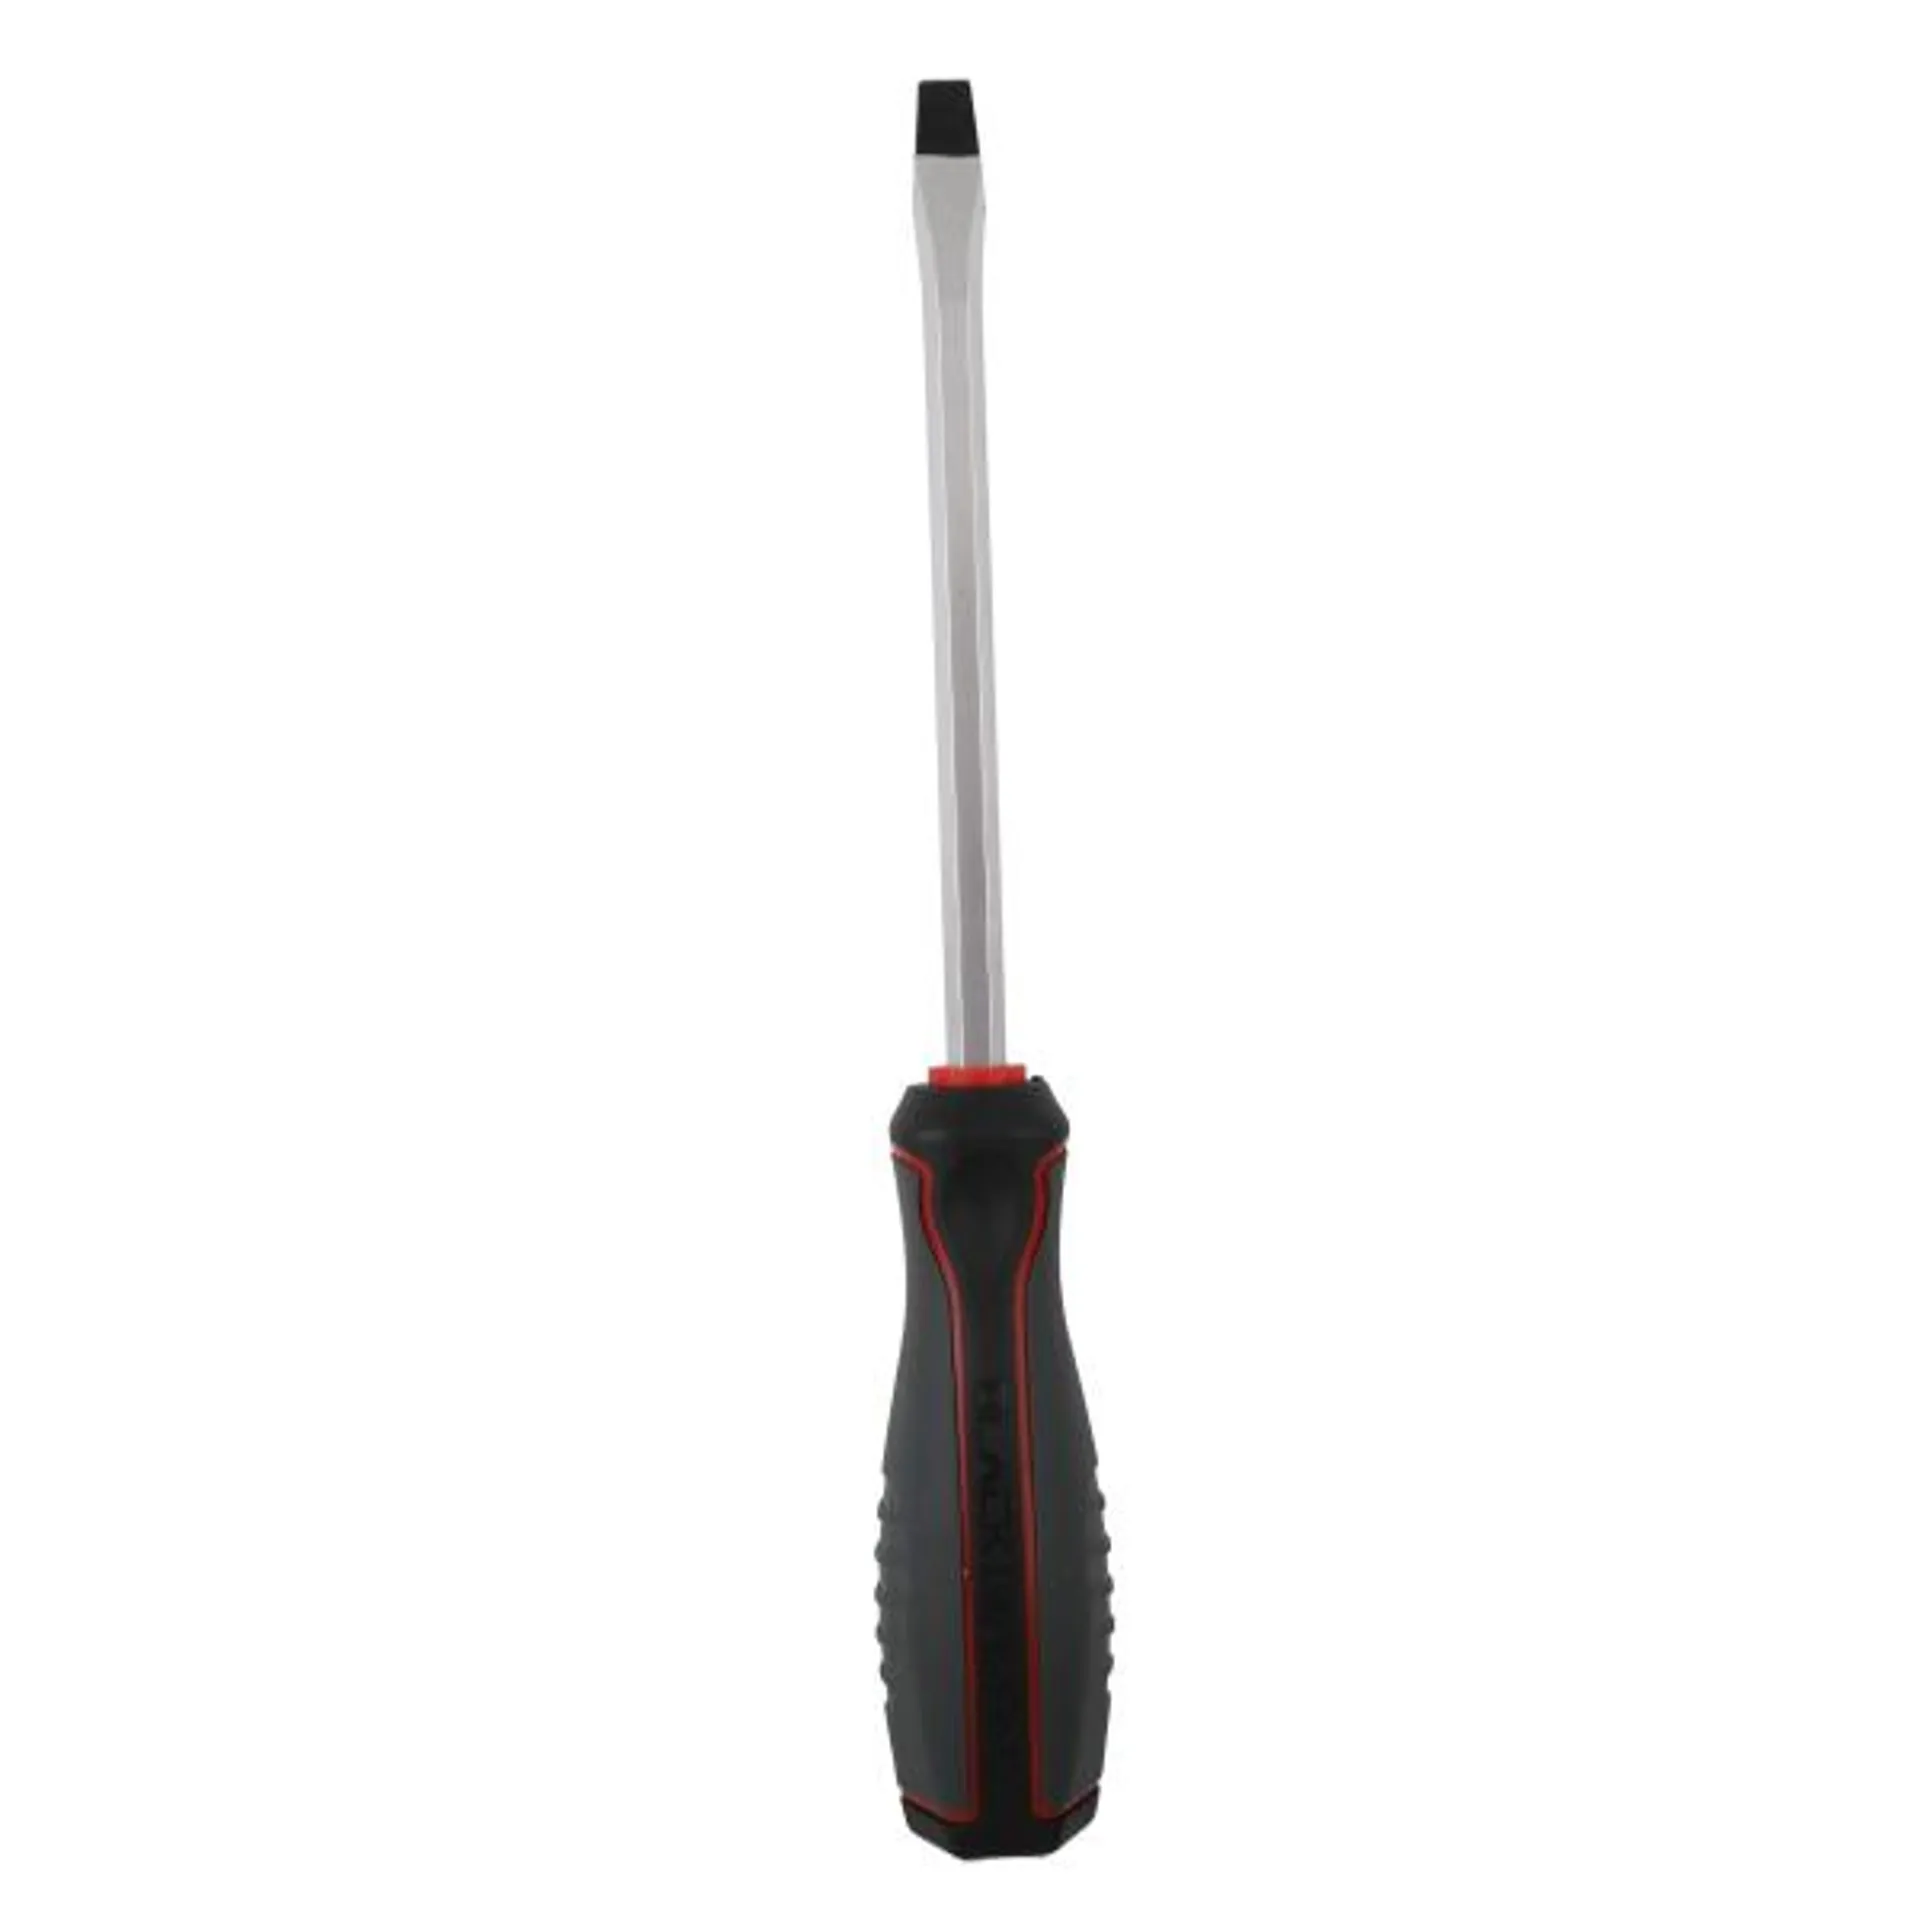 5/16" X 6" Slotted Comfort Grip Screwdriver